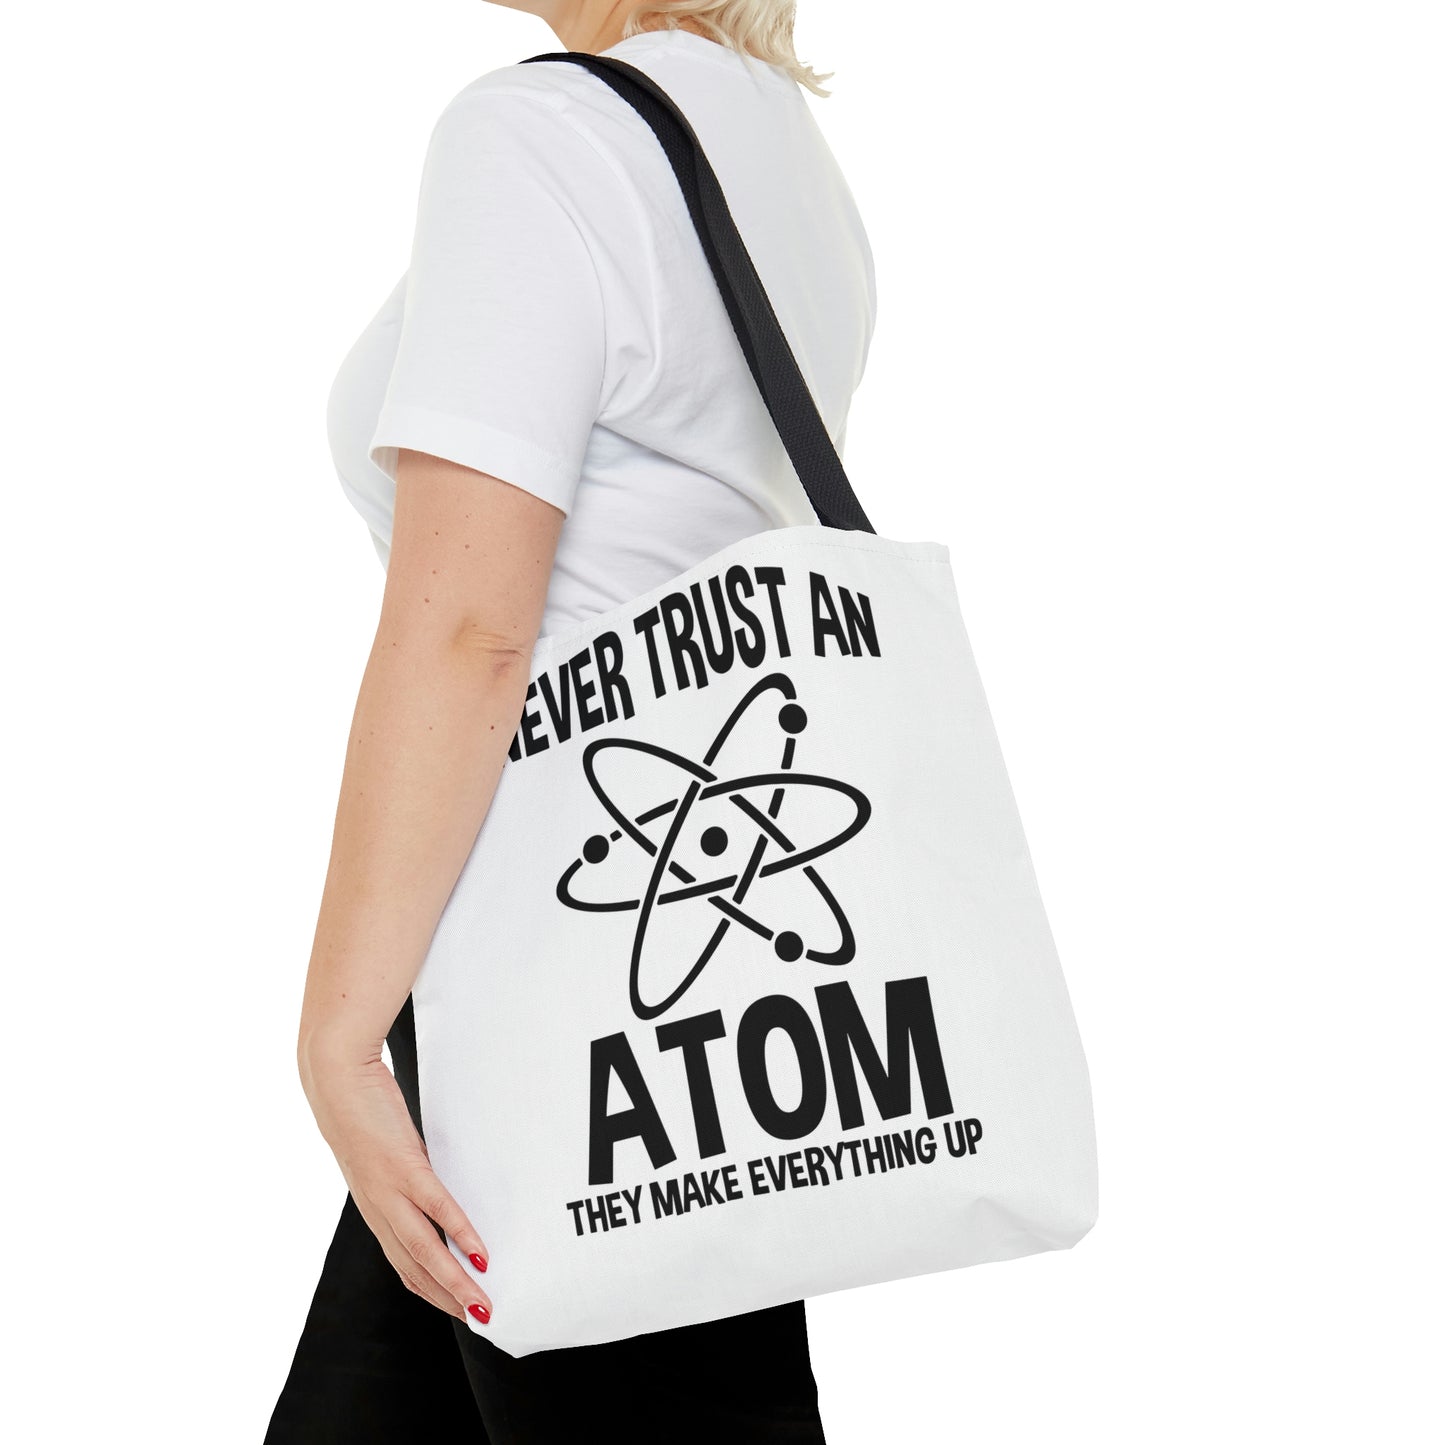 "Never trust an atom, they make everything up &  Science, It's like magic, but real Tote Bag